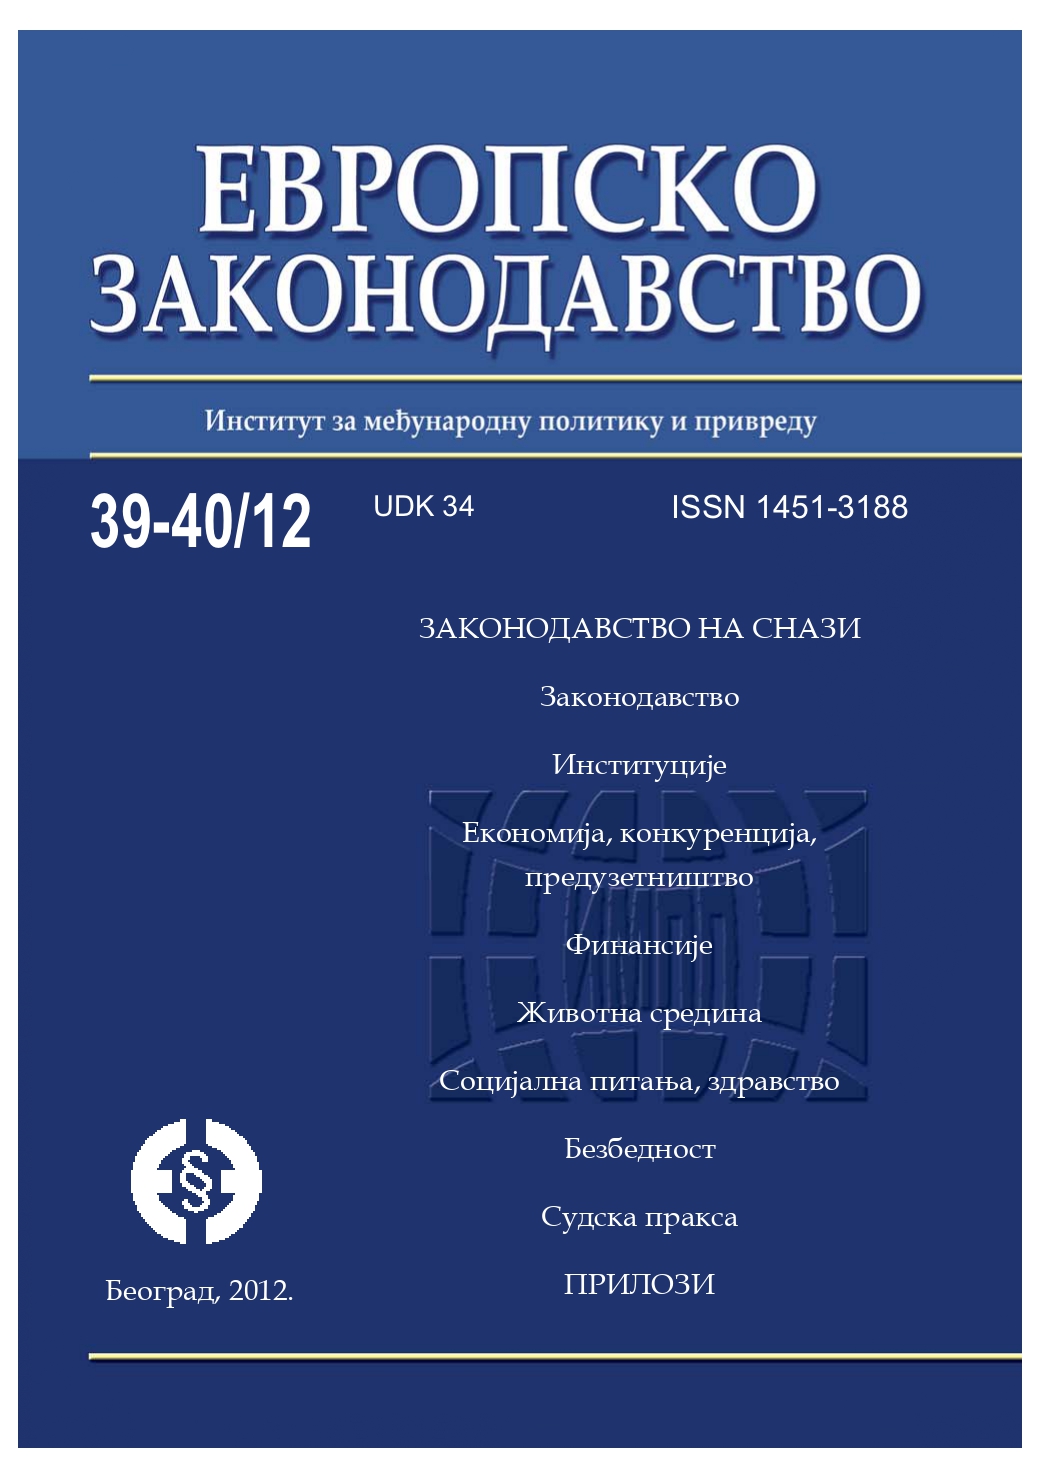 Regulation 223/2009 of the European Parliament and of the Council on European Statistics Cover Image